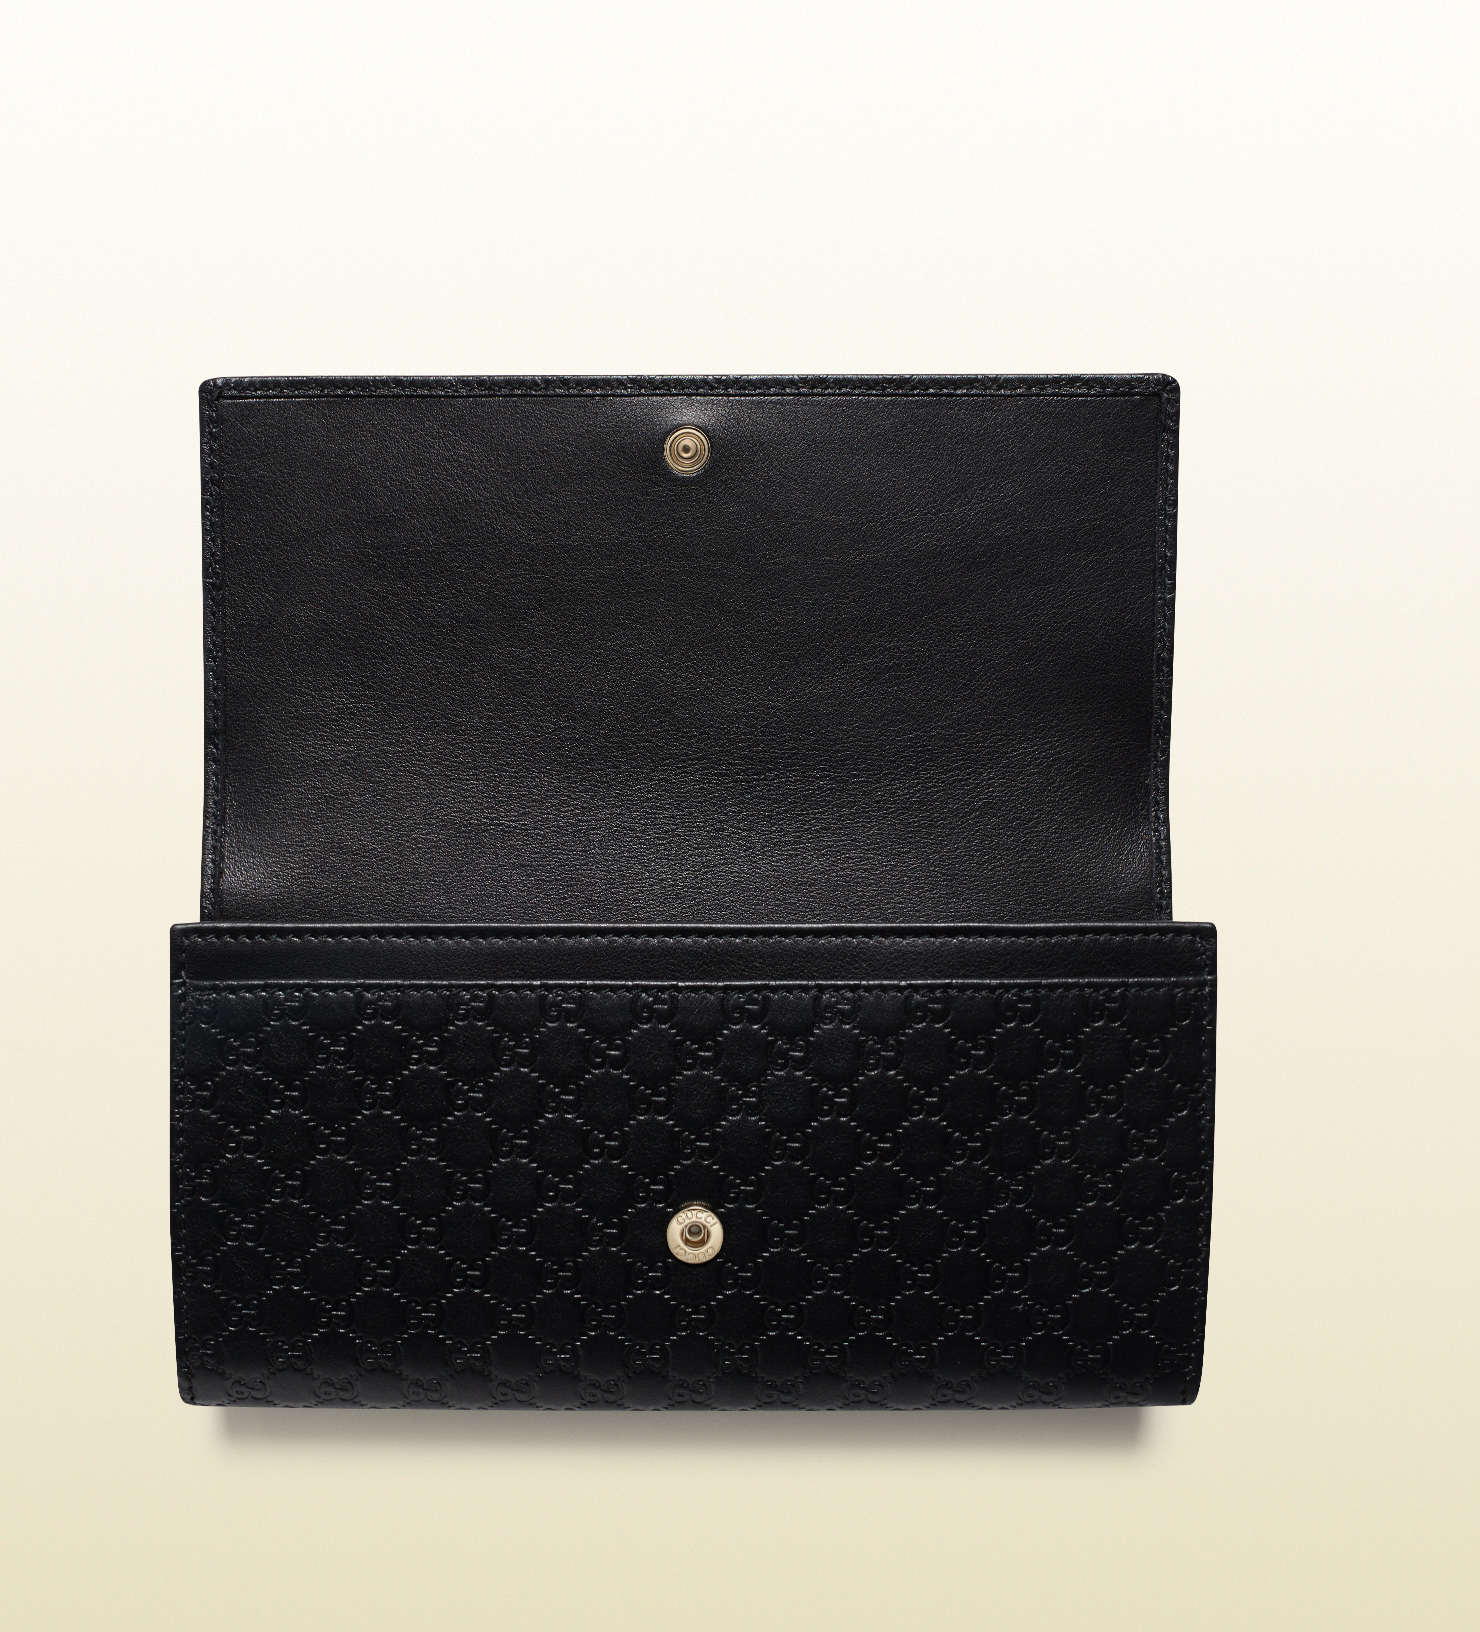 Gucci Bow Microssima Leather Continental Wallet in Black - Lyst